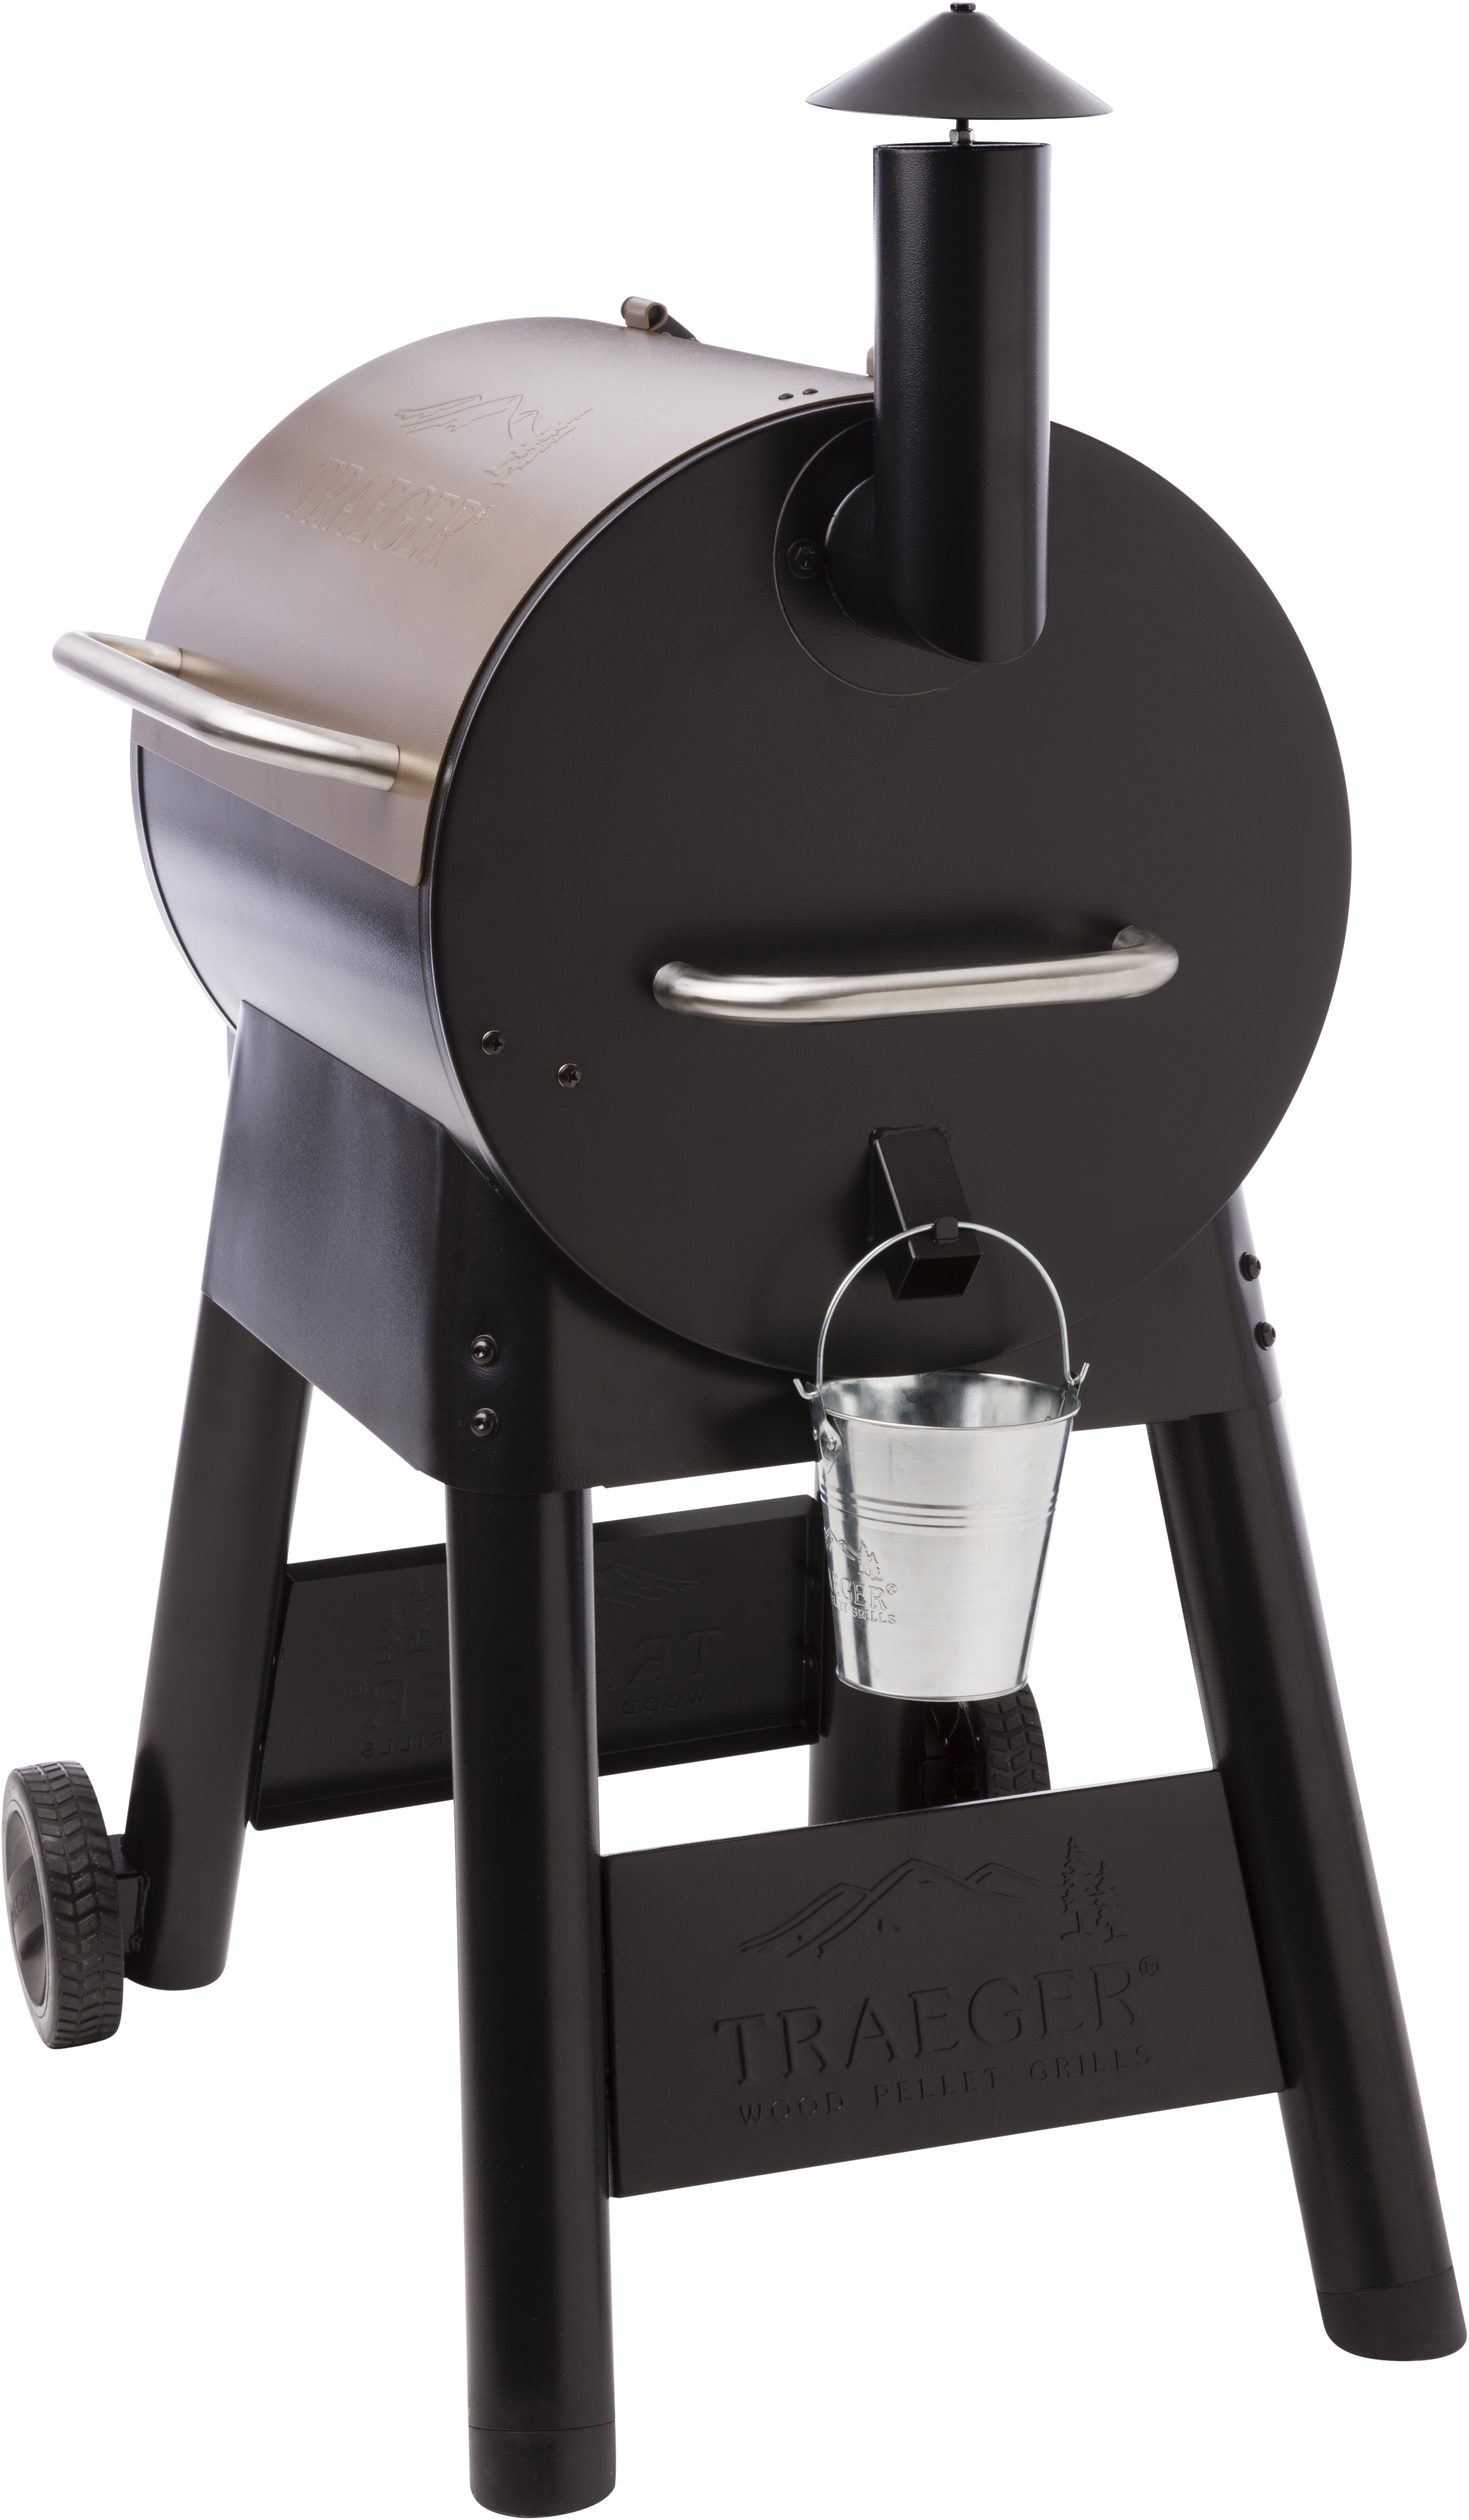 Traeger Pellet Grills Pro 22 Wood Pellet Grill and Smoker - Bronze - image 2 of 10